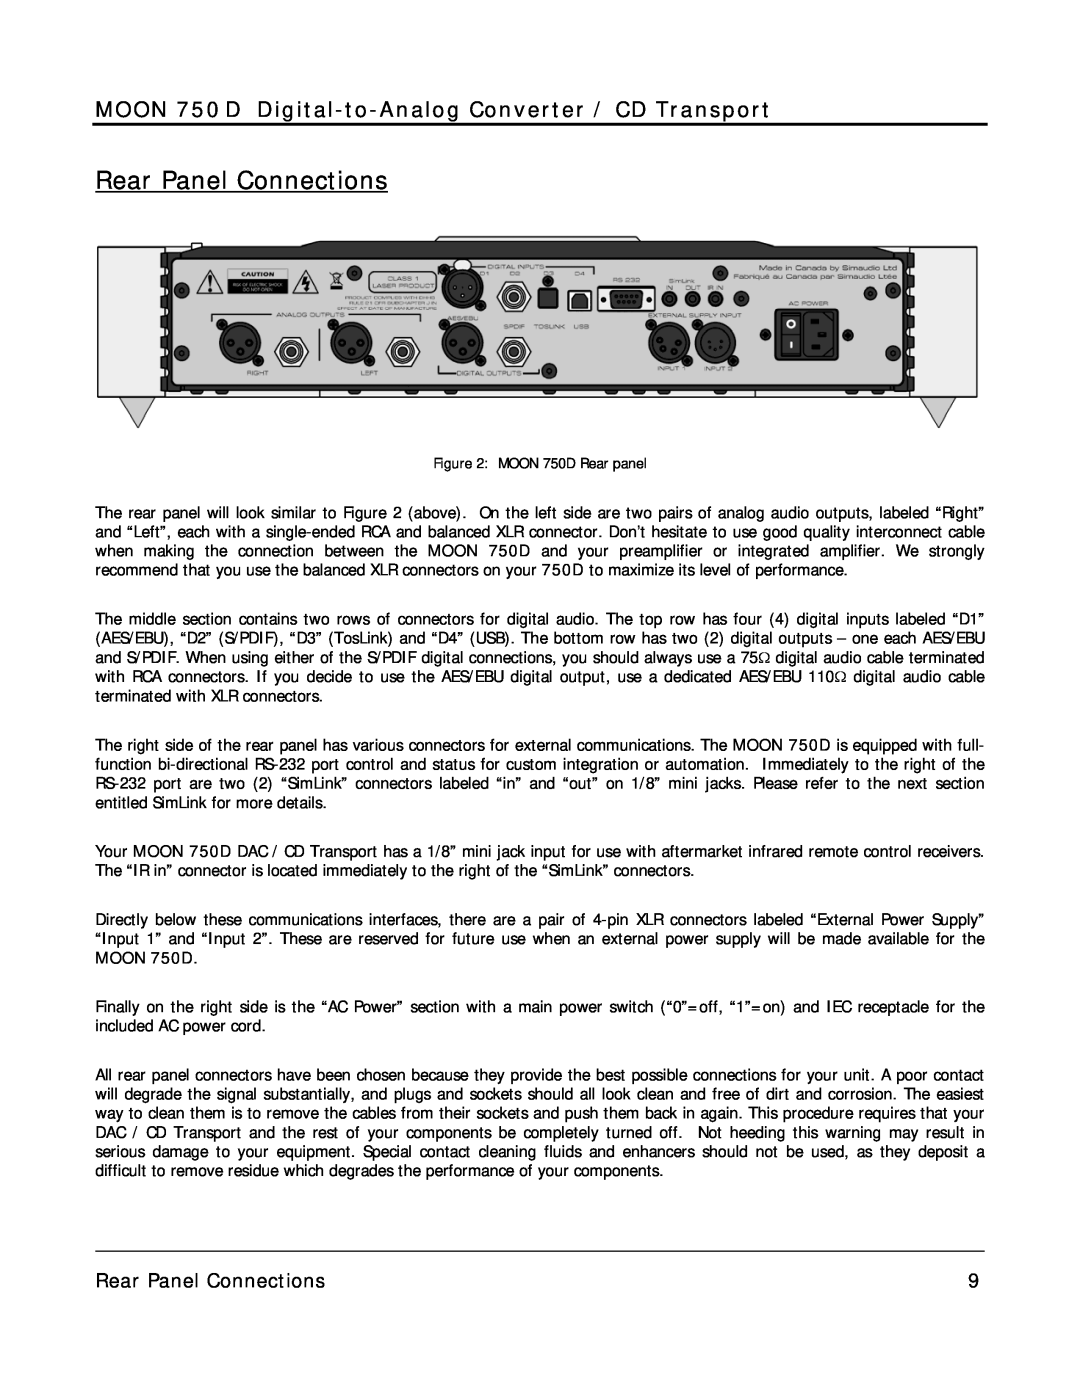 Simaudio owner manual Rear Panel Connections, MOON 750 D Digital-to-Analog Converter / CD Transport, MOON 750D 